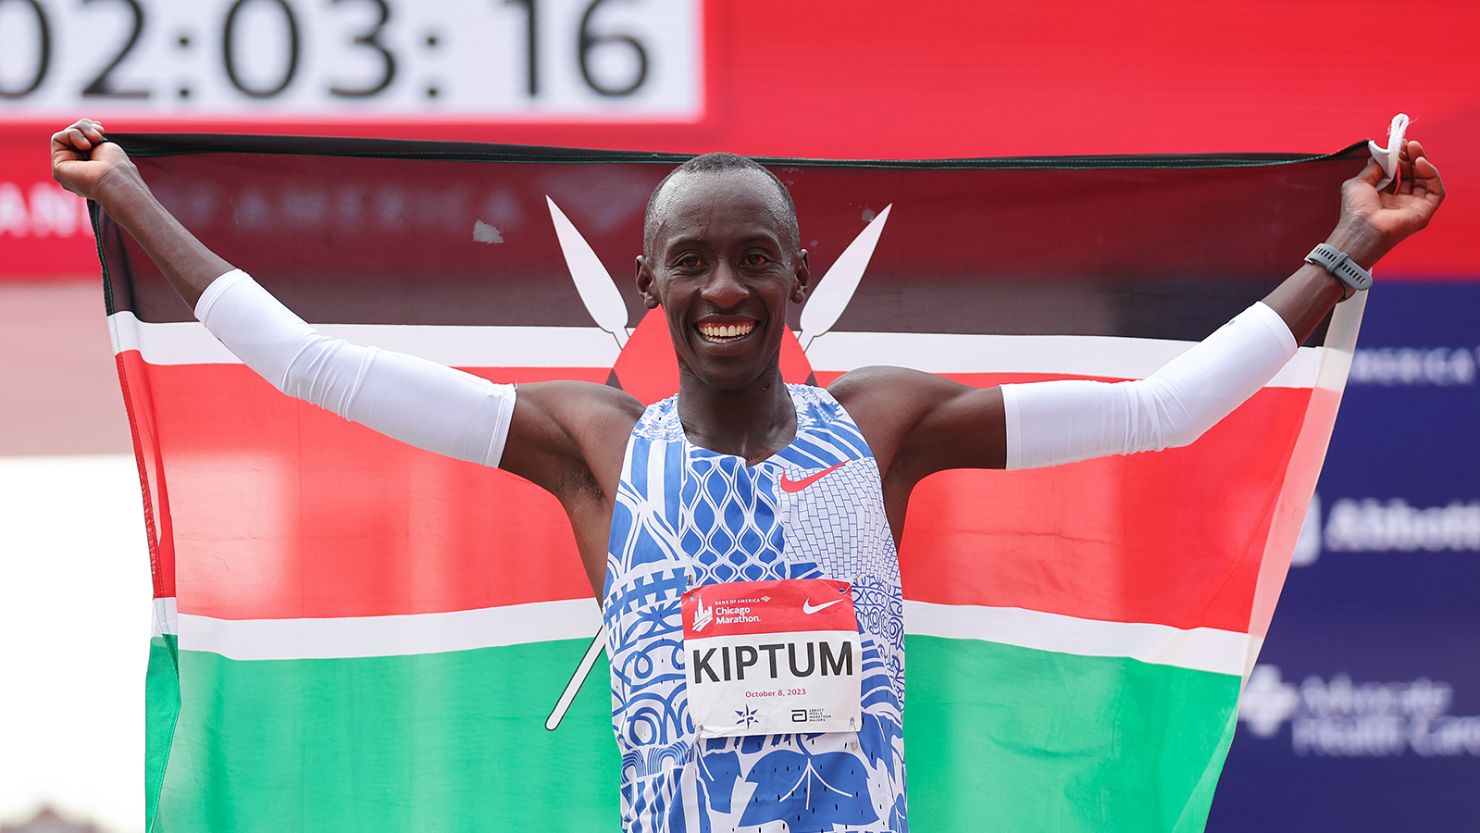 Kelvin Kiptum celebrates after winning the 2023 Chicago Marathon professional men's division and setting a world record marathon time of 2:00.35 at Grant Park on October 8, 2023 in Chicago, Illinois.